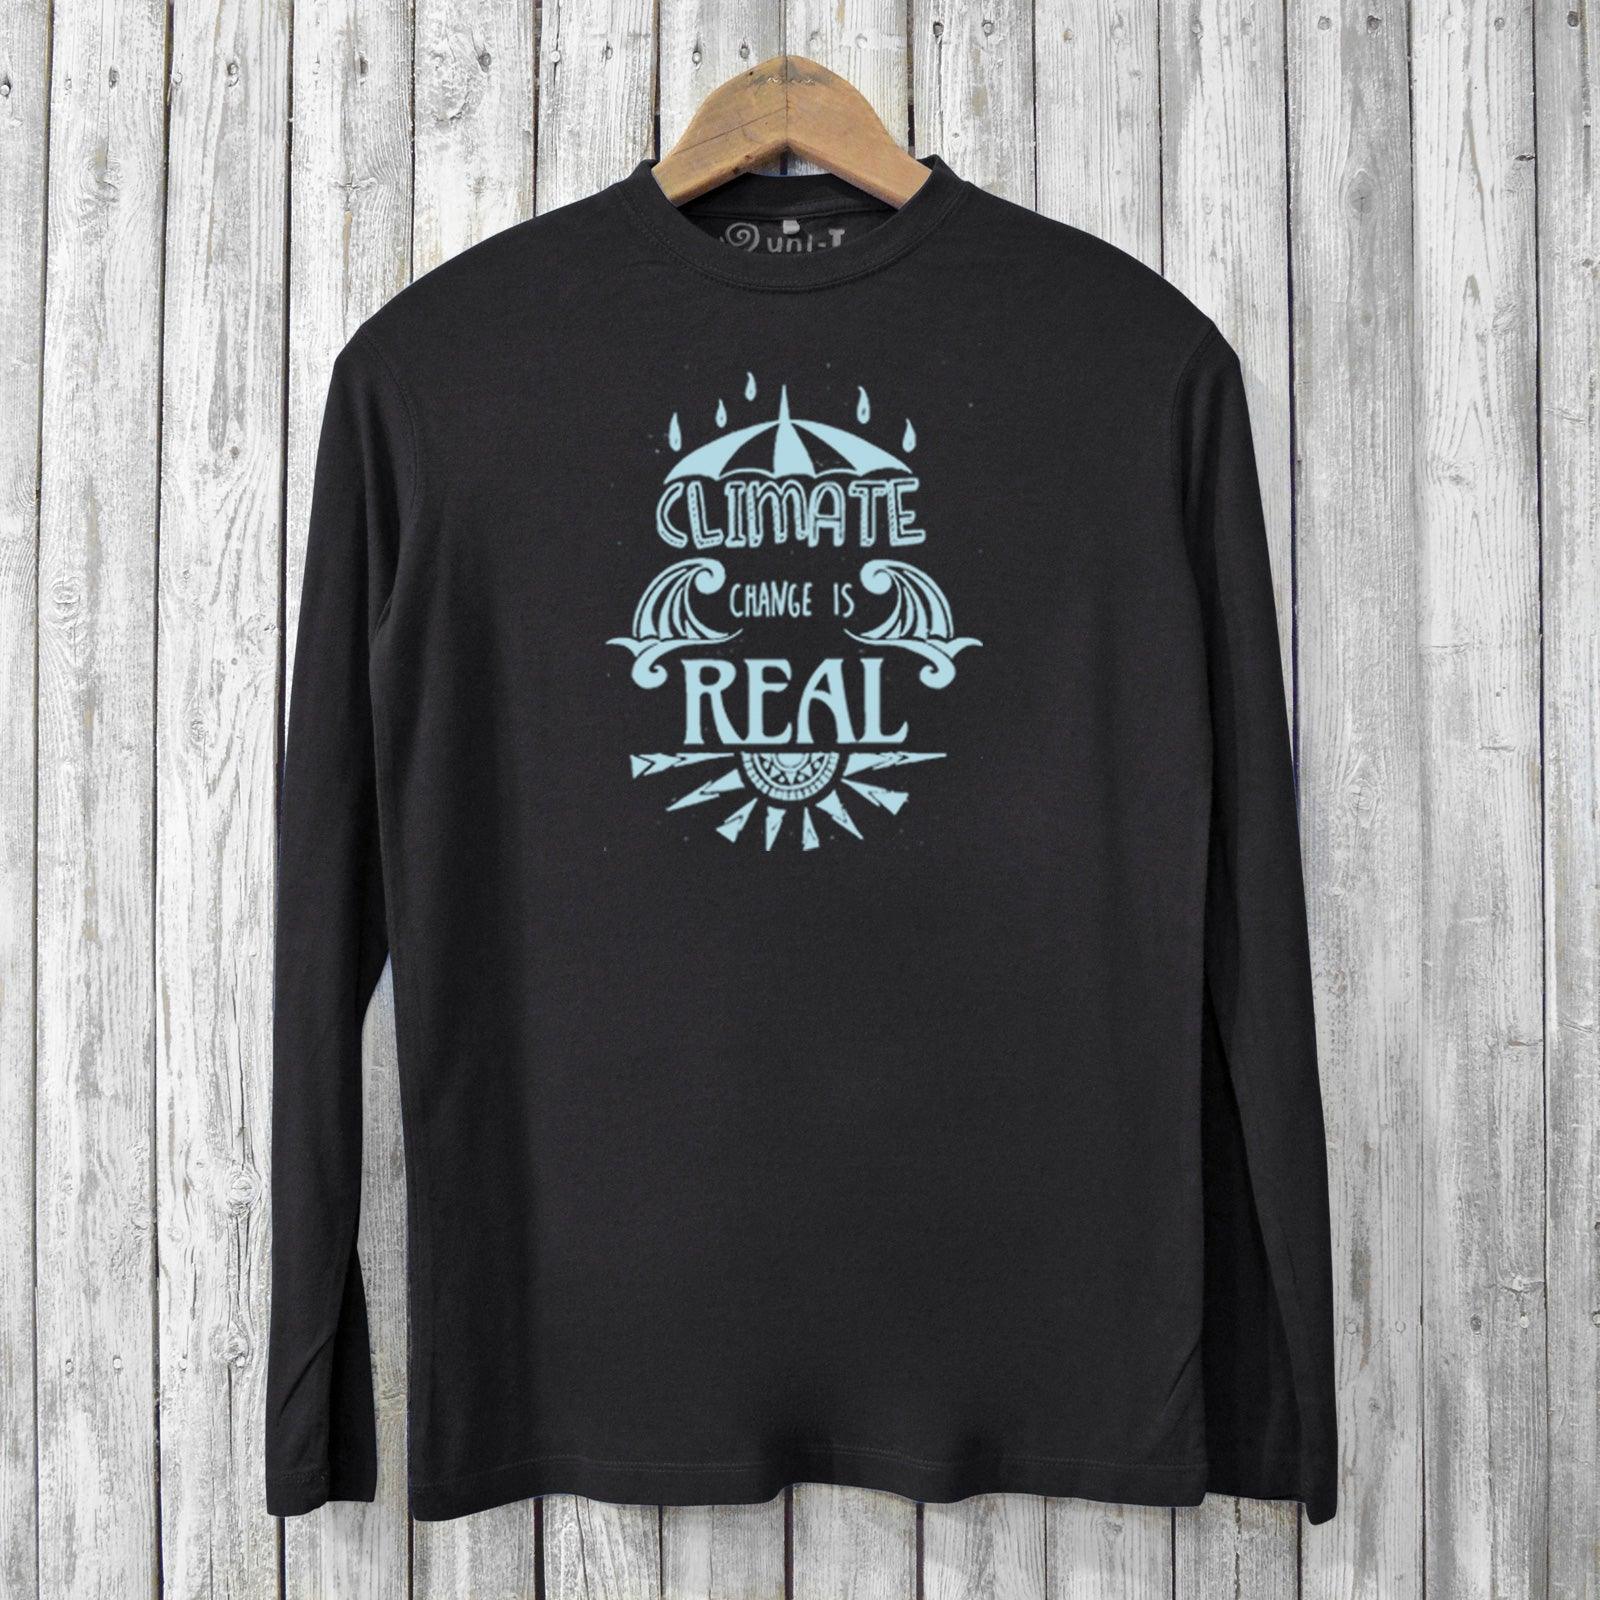 Climate Change Is Real, Long Sleeve T-shirts for Men Uni-T